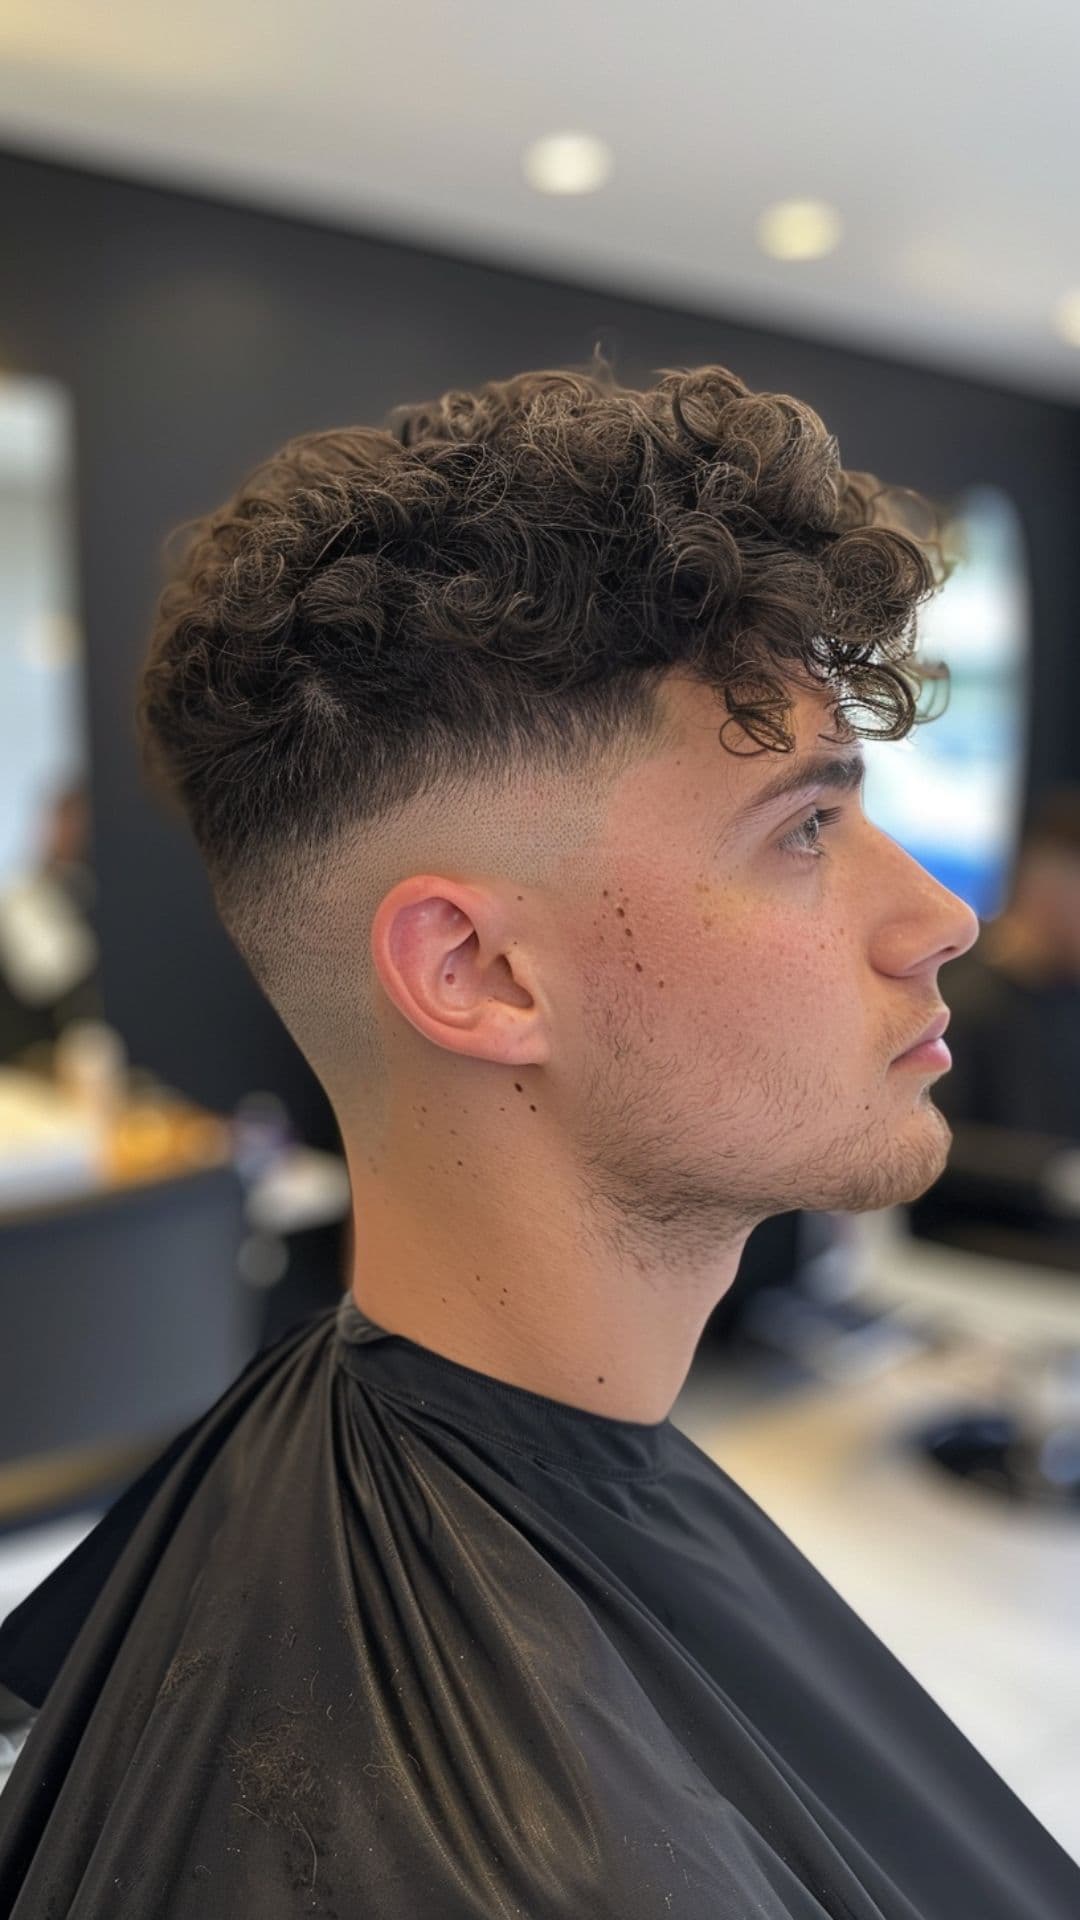 A man modelling a curly fade hairstyle.